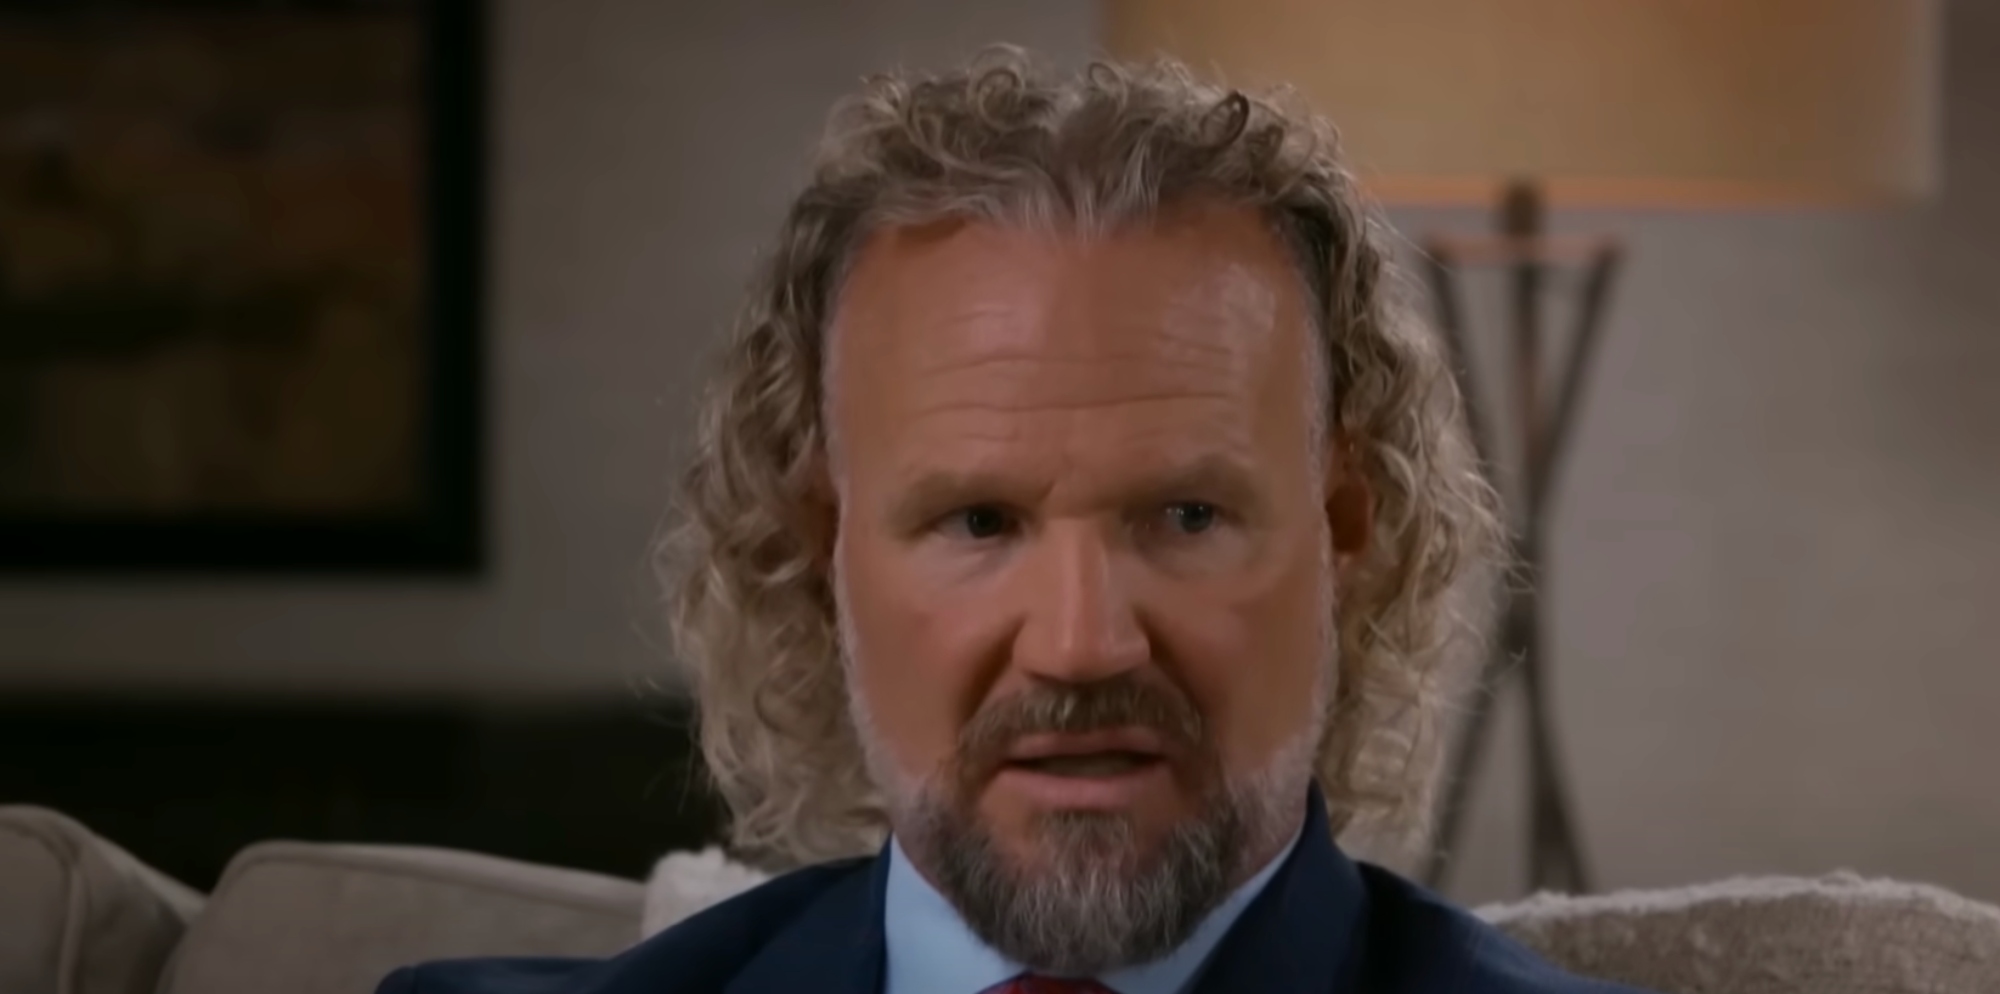 What We Hope Is Addressed At the Sister Wives Season 18 Tell All